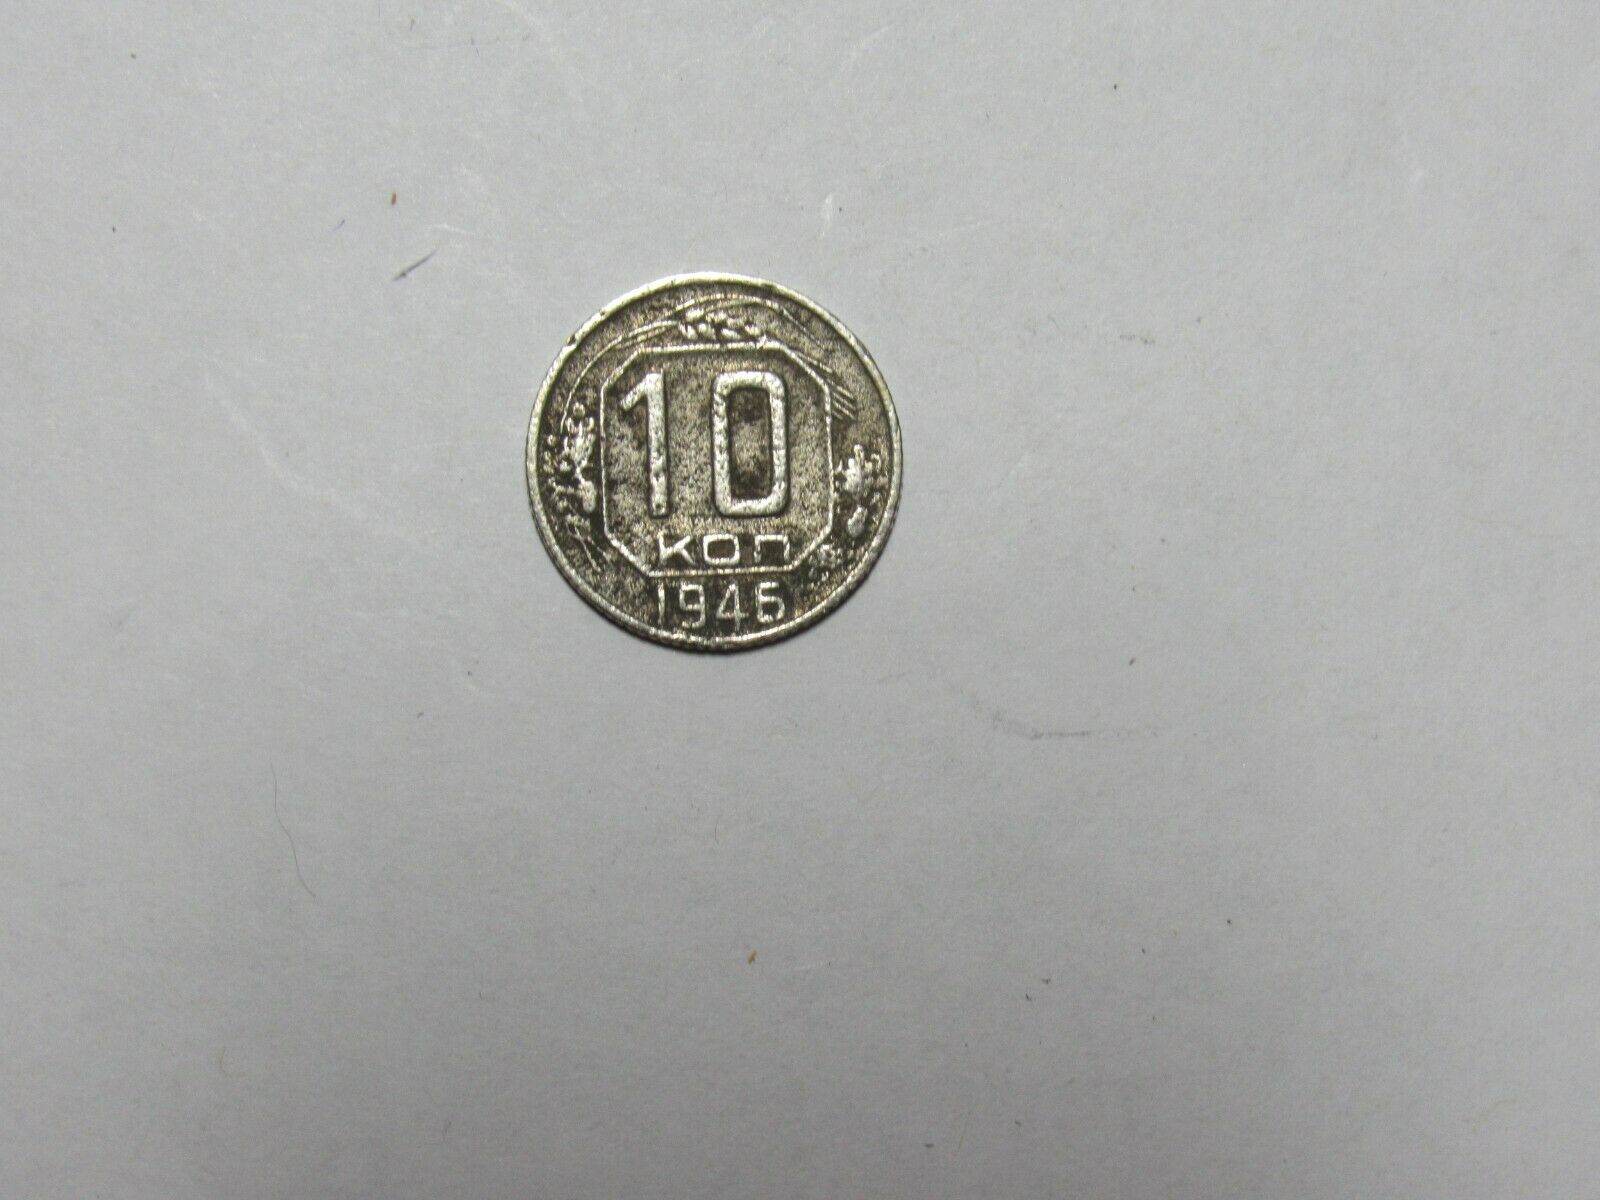 Old Russia Ussr Coin - 1946 10 Kopeks - Circulated